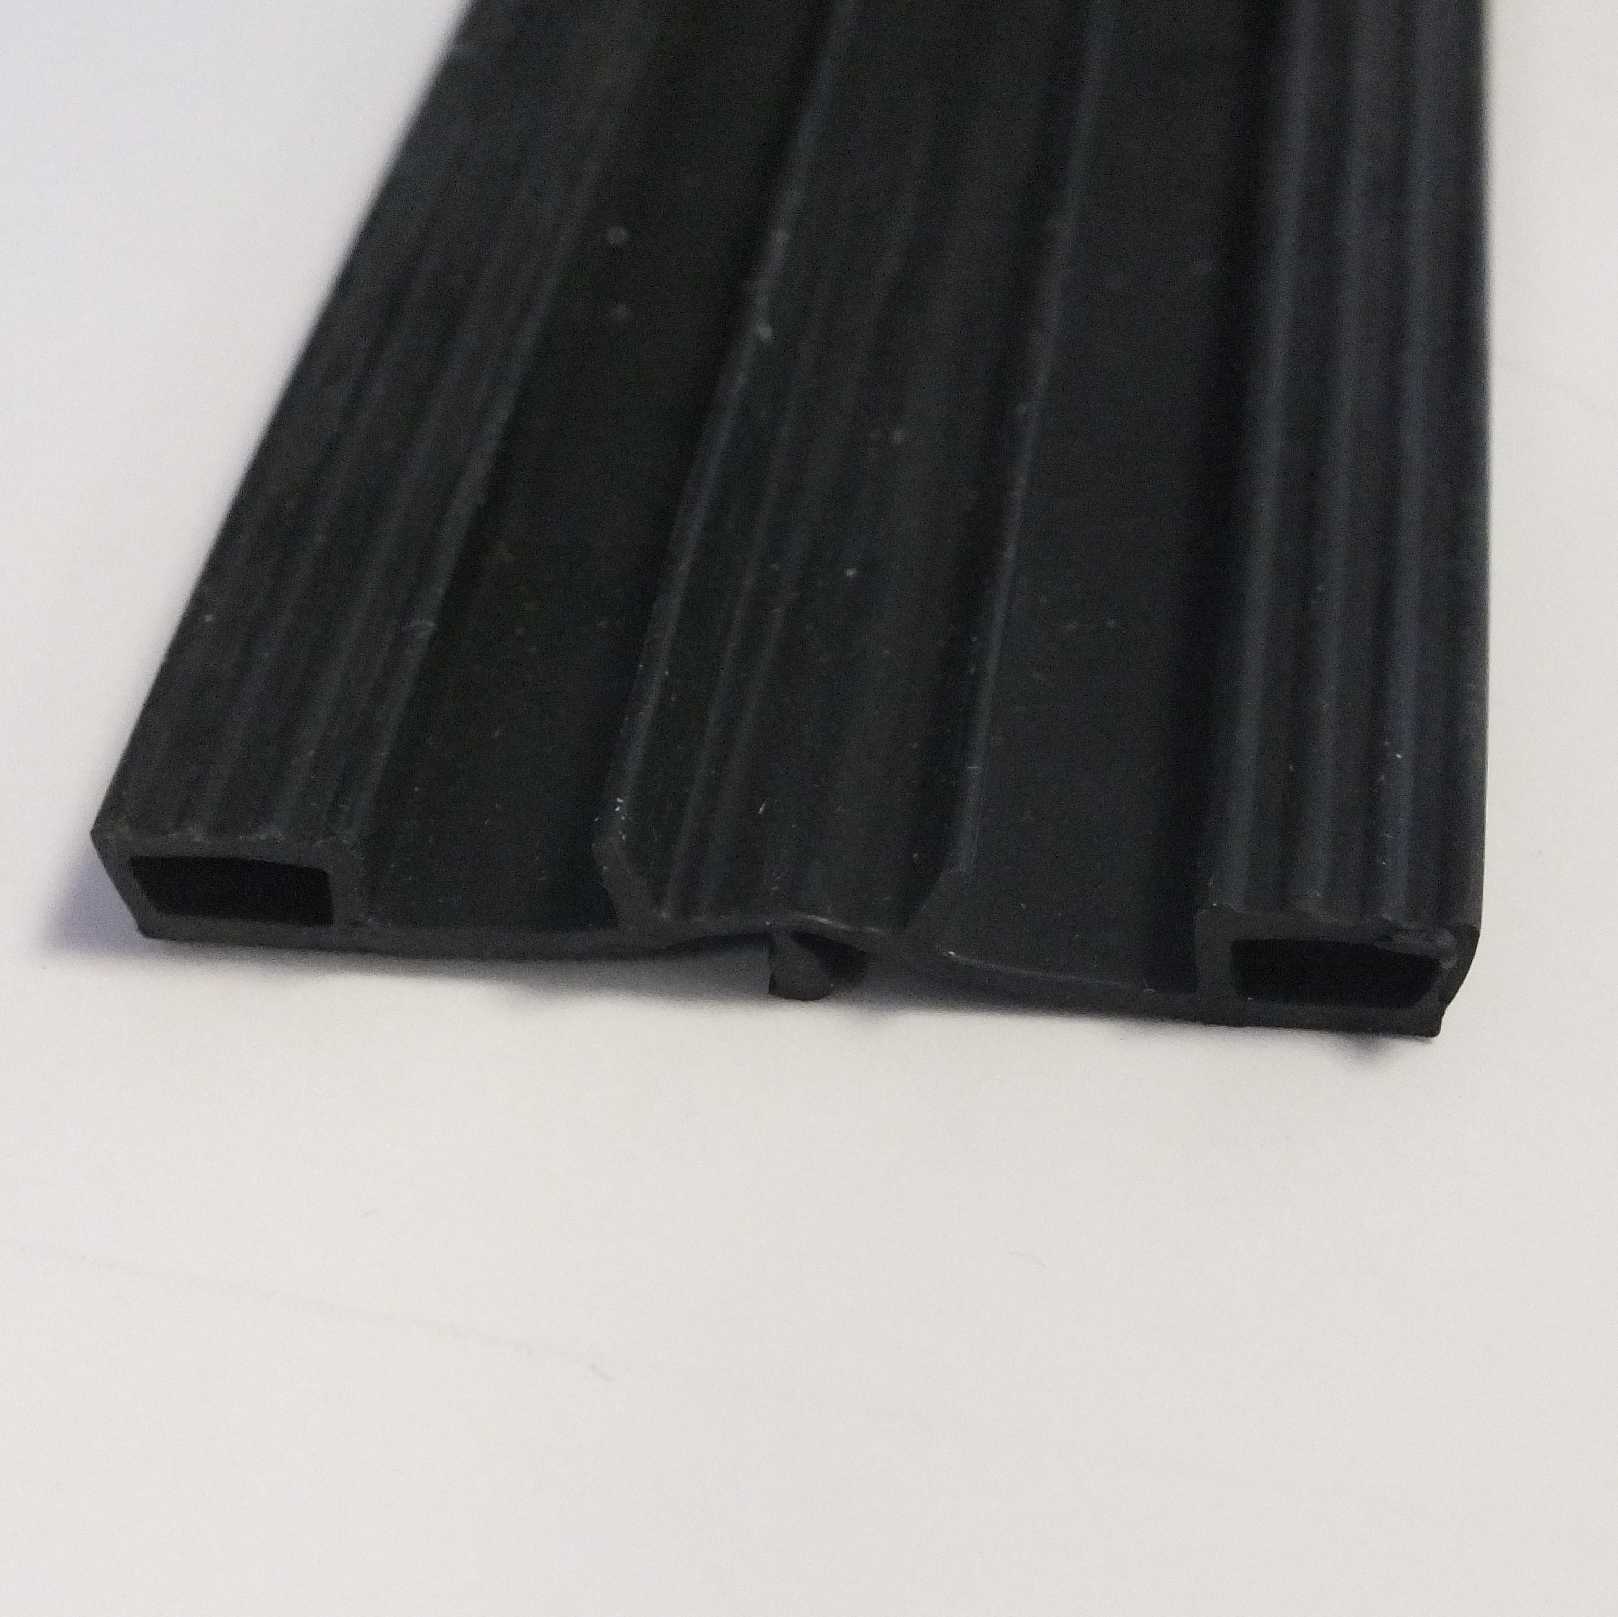 Buy Base Gasket for 50 and 60mm wide Aluminium Rafter Glazing Bars, 1.0m online today